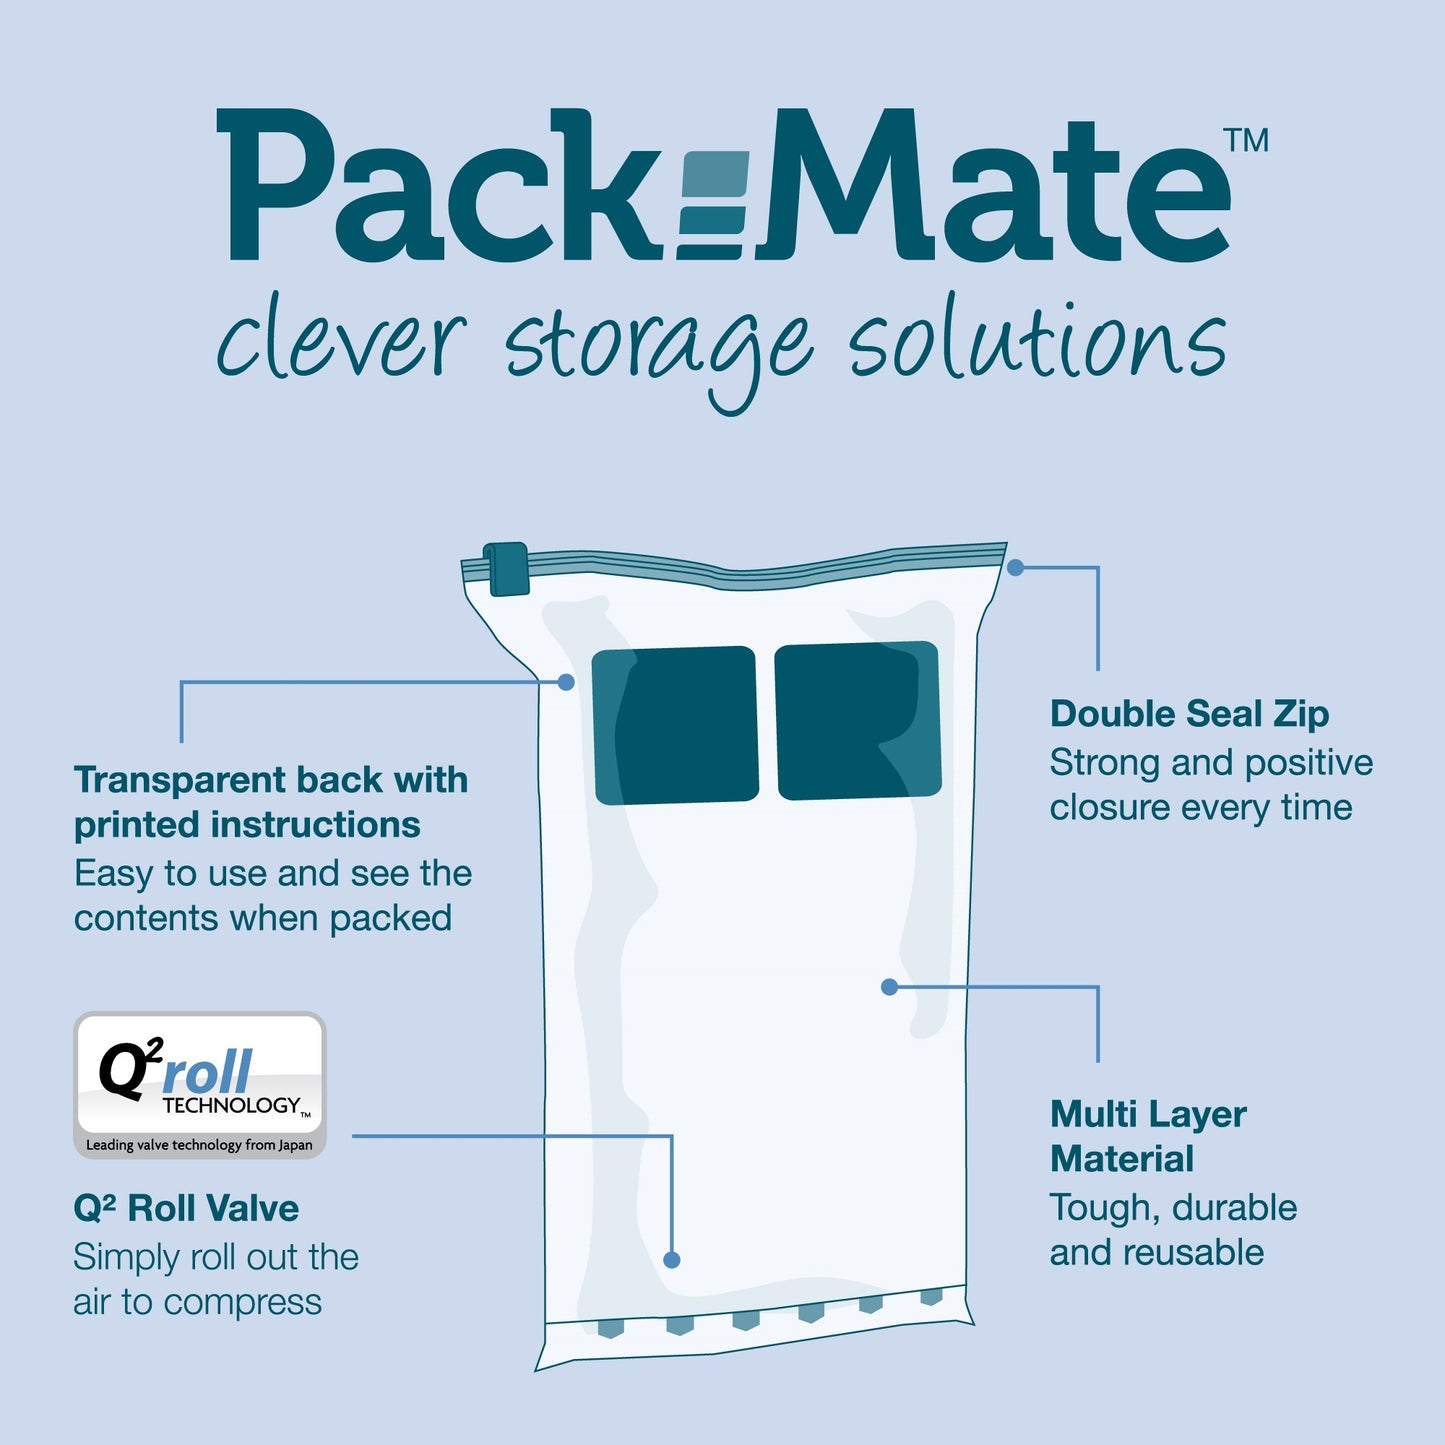 Packmate 8pc Travel Roll Storage Bag Set (2 Small, 4 Medium, 2 Large)